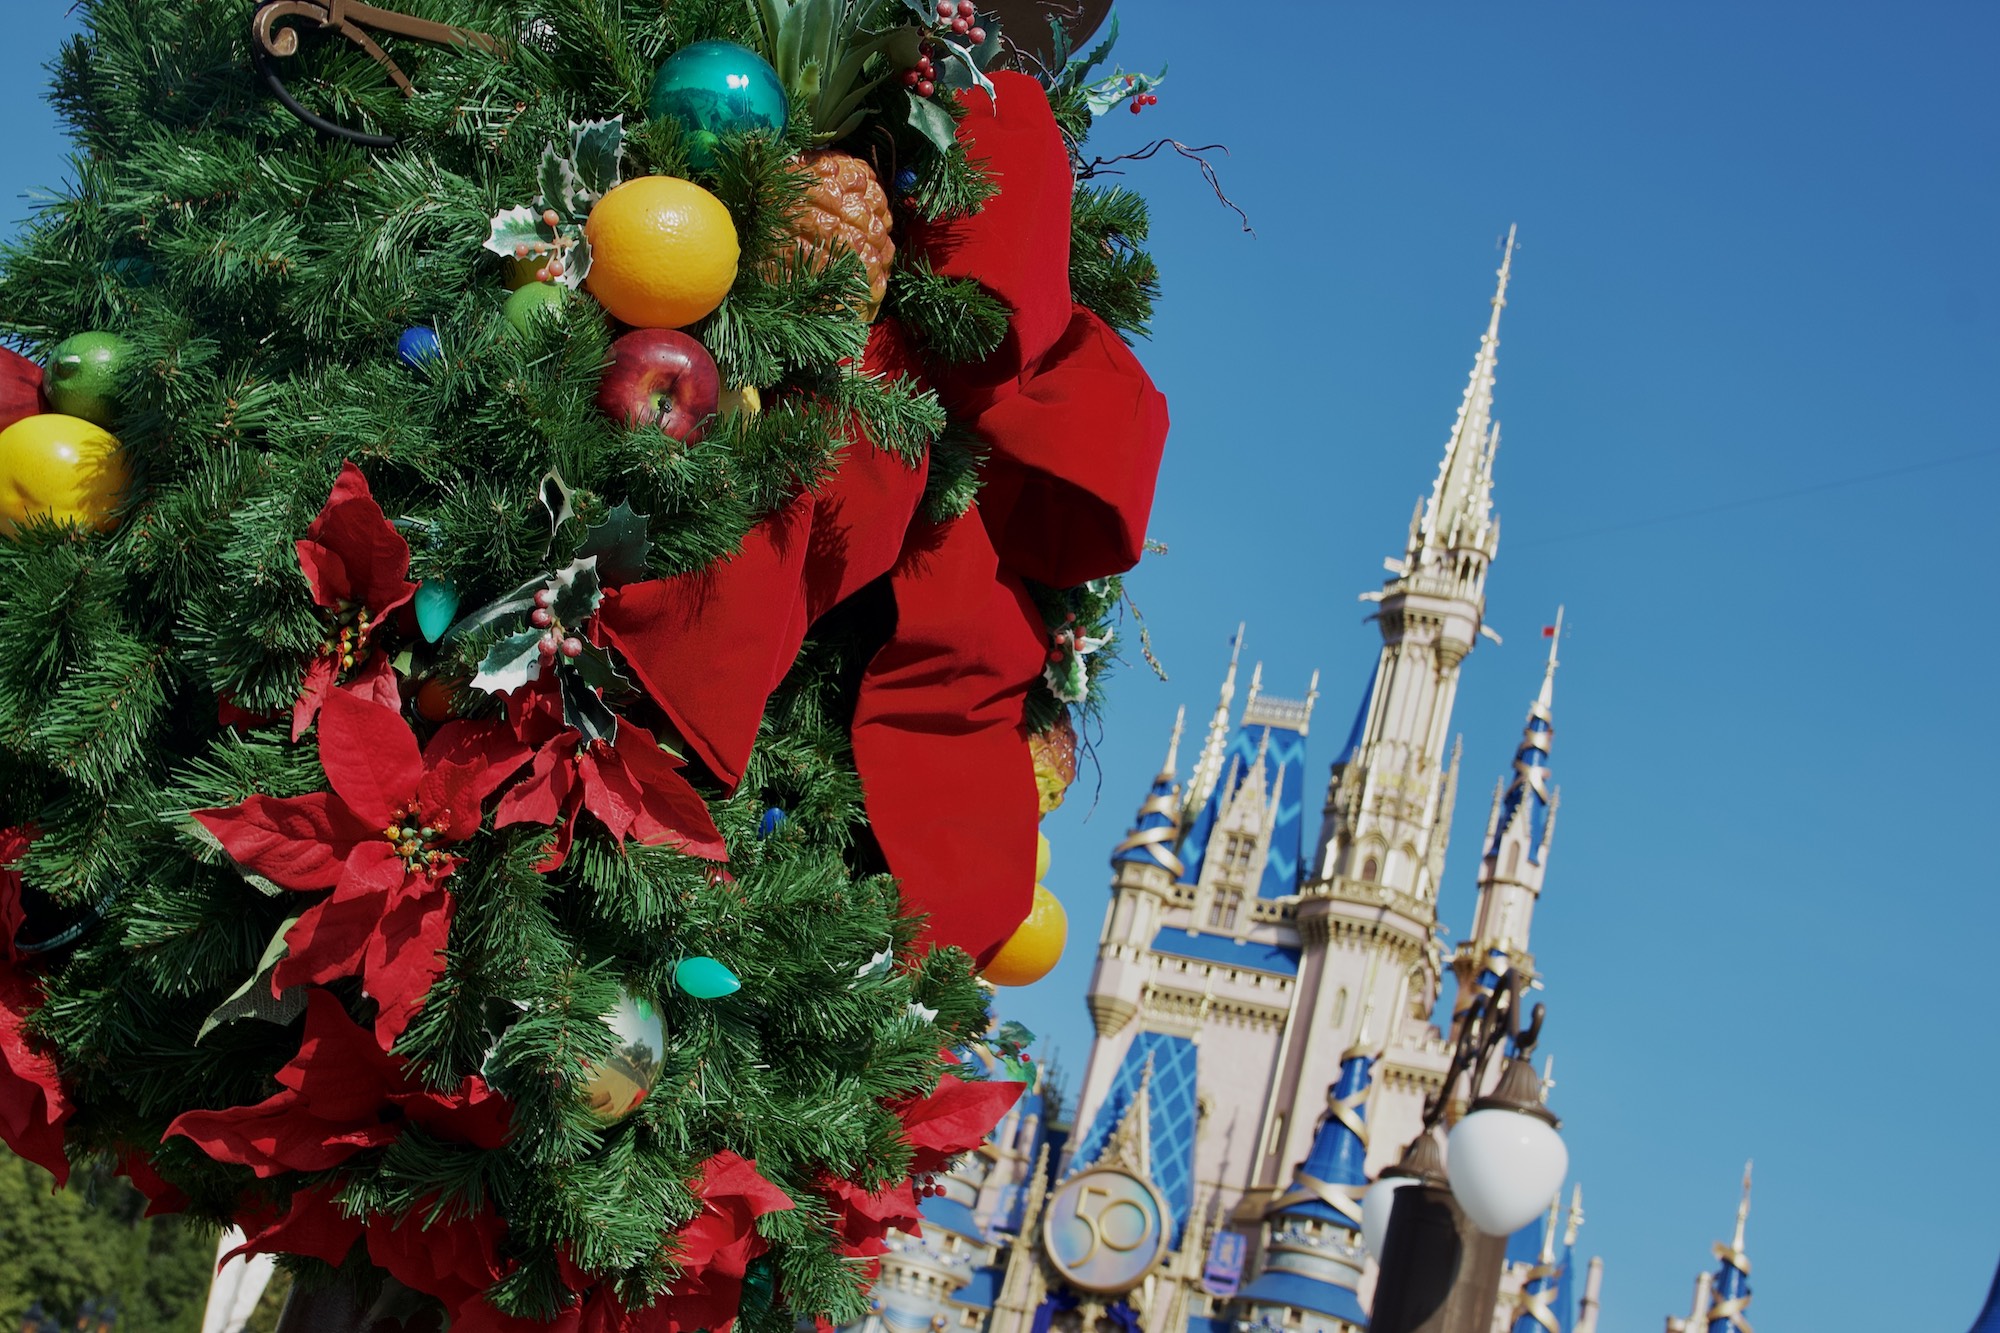 Holiday wreath in front of Cinderella castle